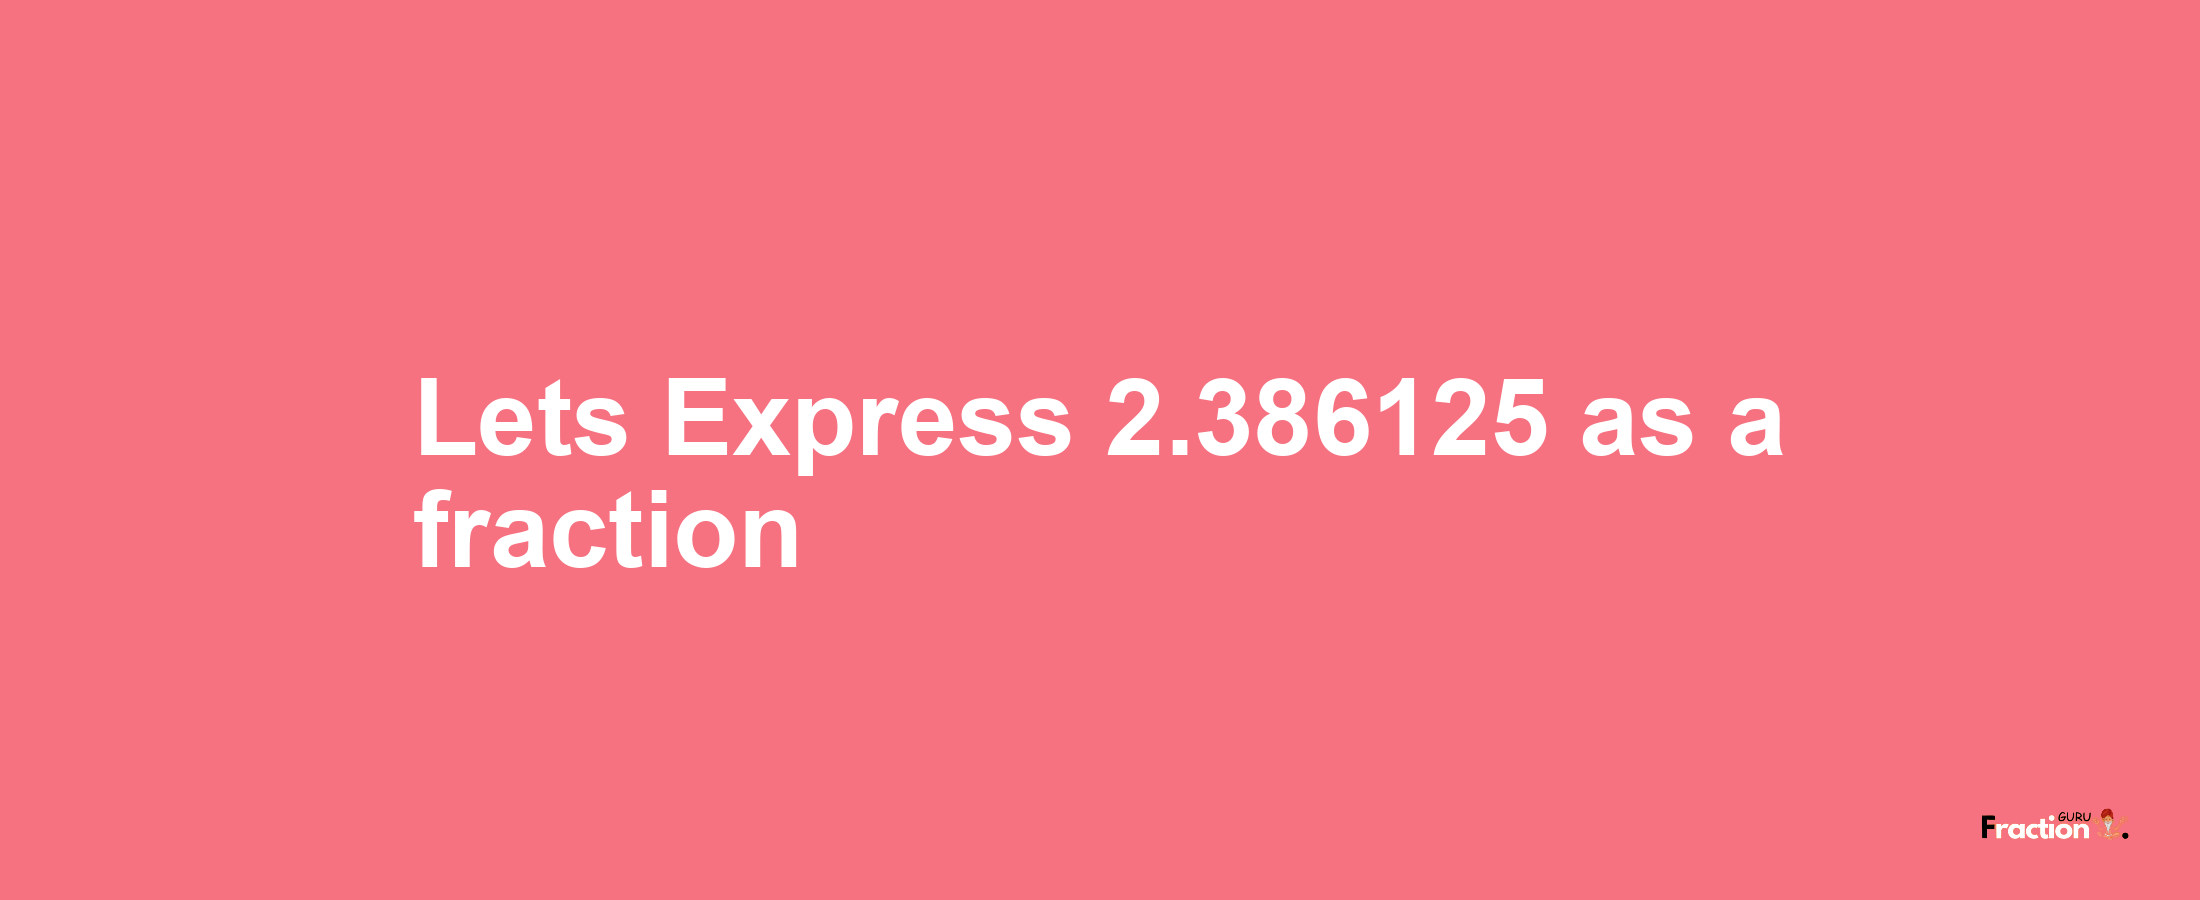 Lets Express 2.386125 as afraction